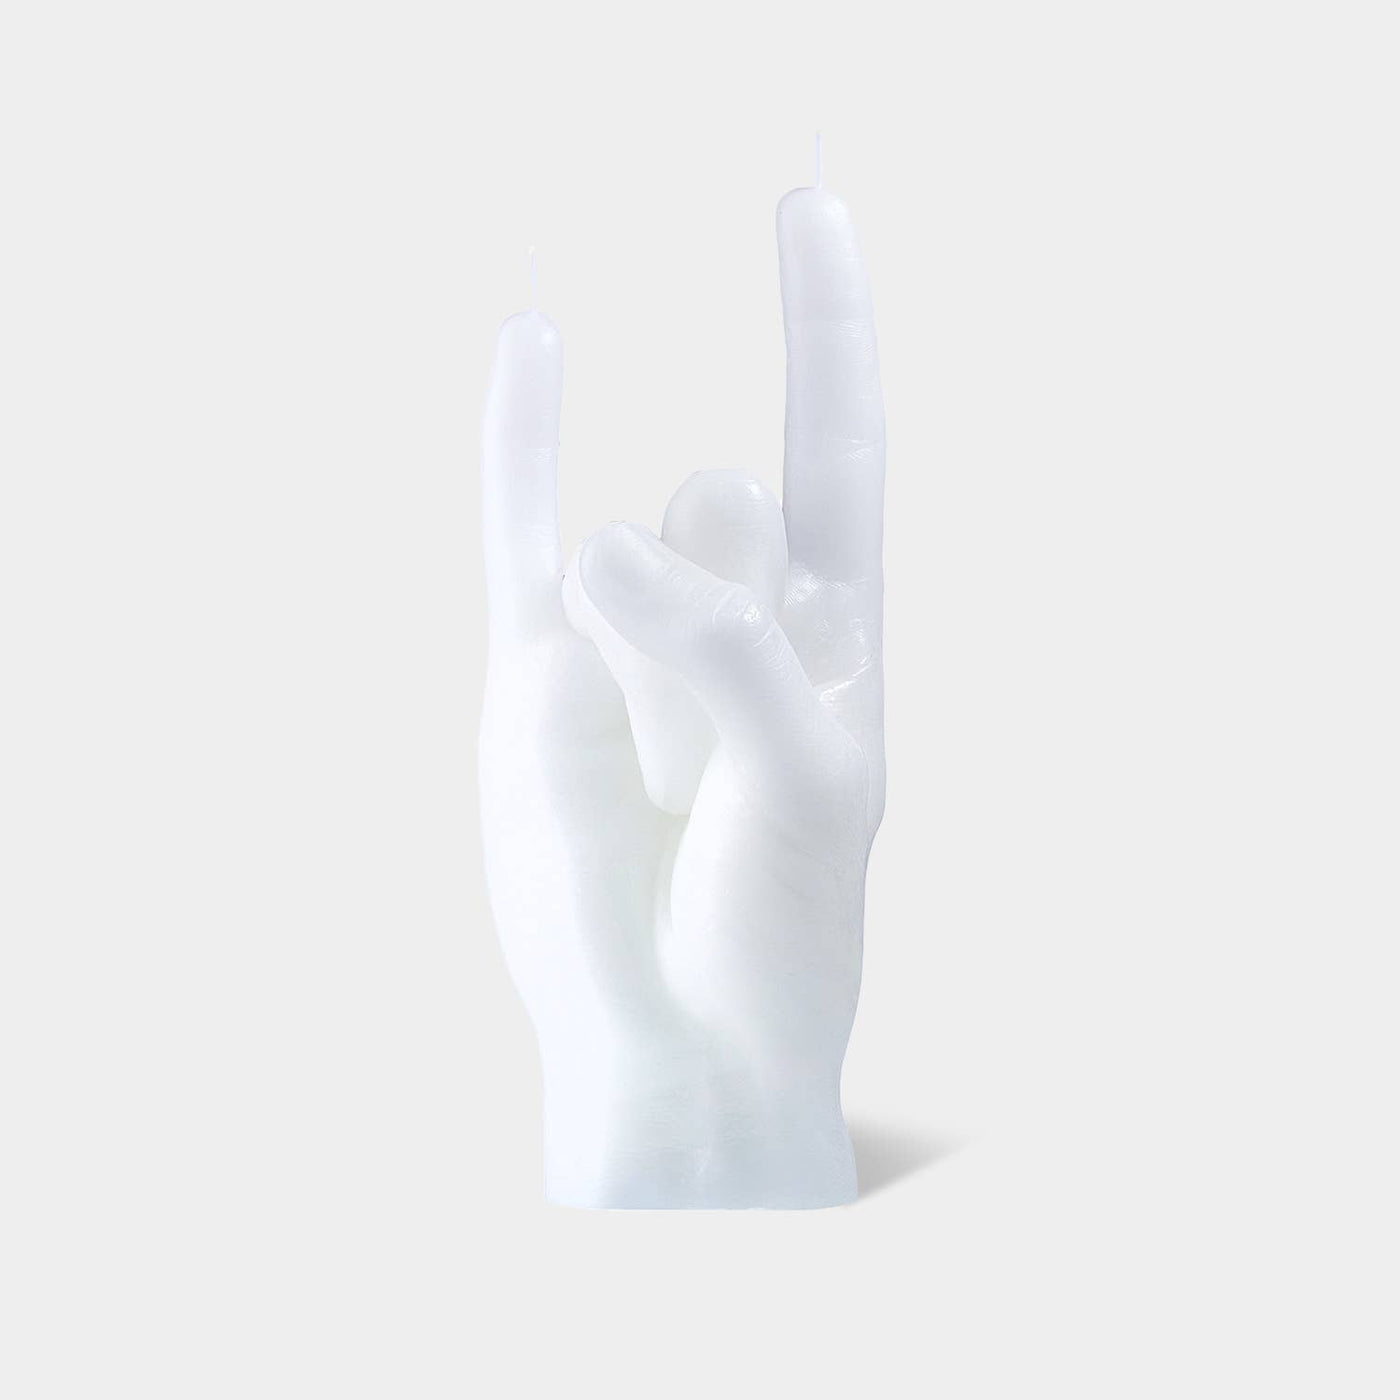 54 Celsius - CandleHand Hand Gesture Candle - You Rock